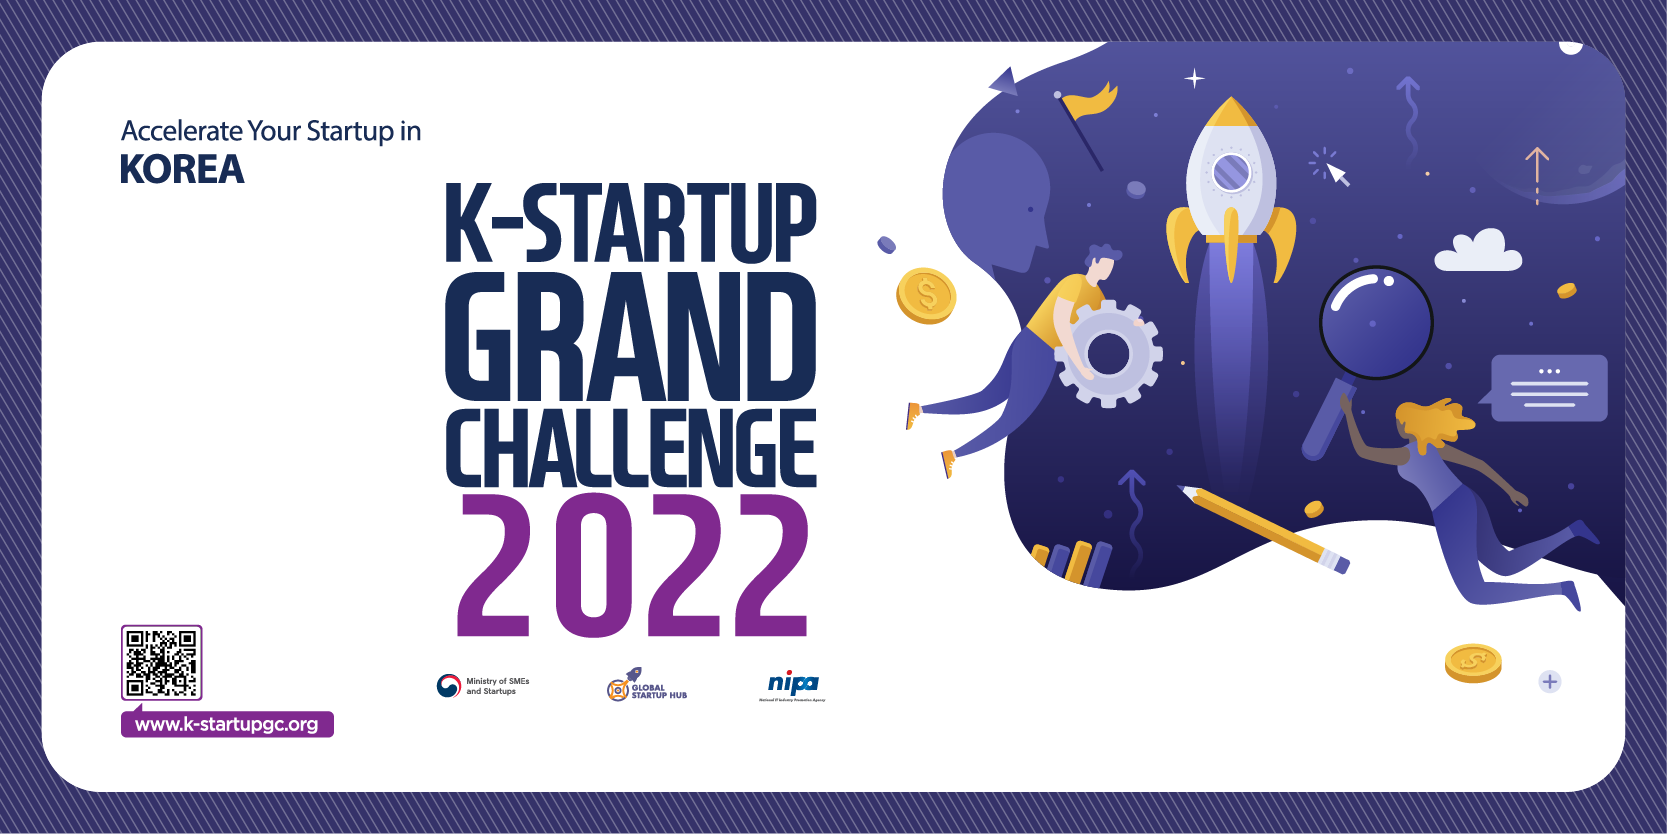 Final call to apply to the K-Startup Grand Challenge 2022 with government-backed acceleration